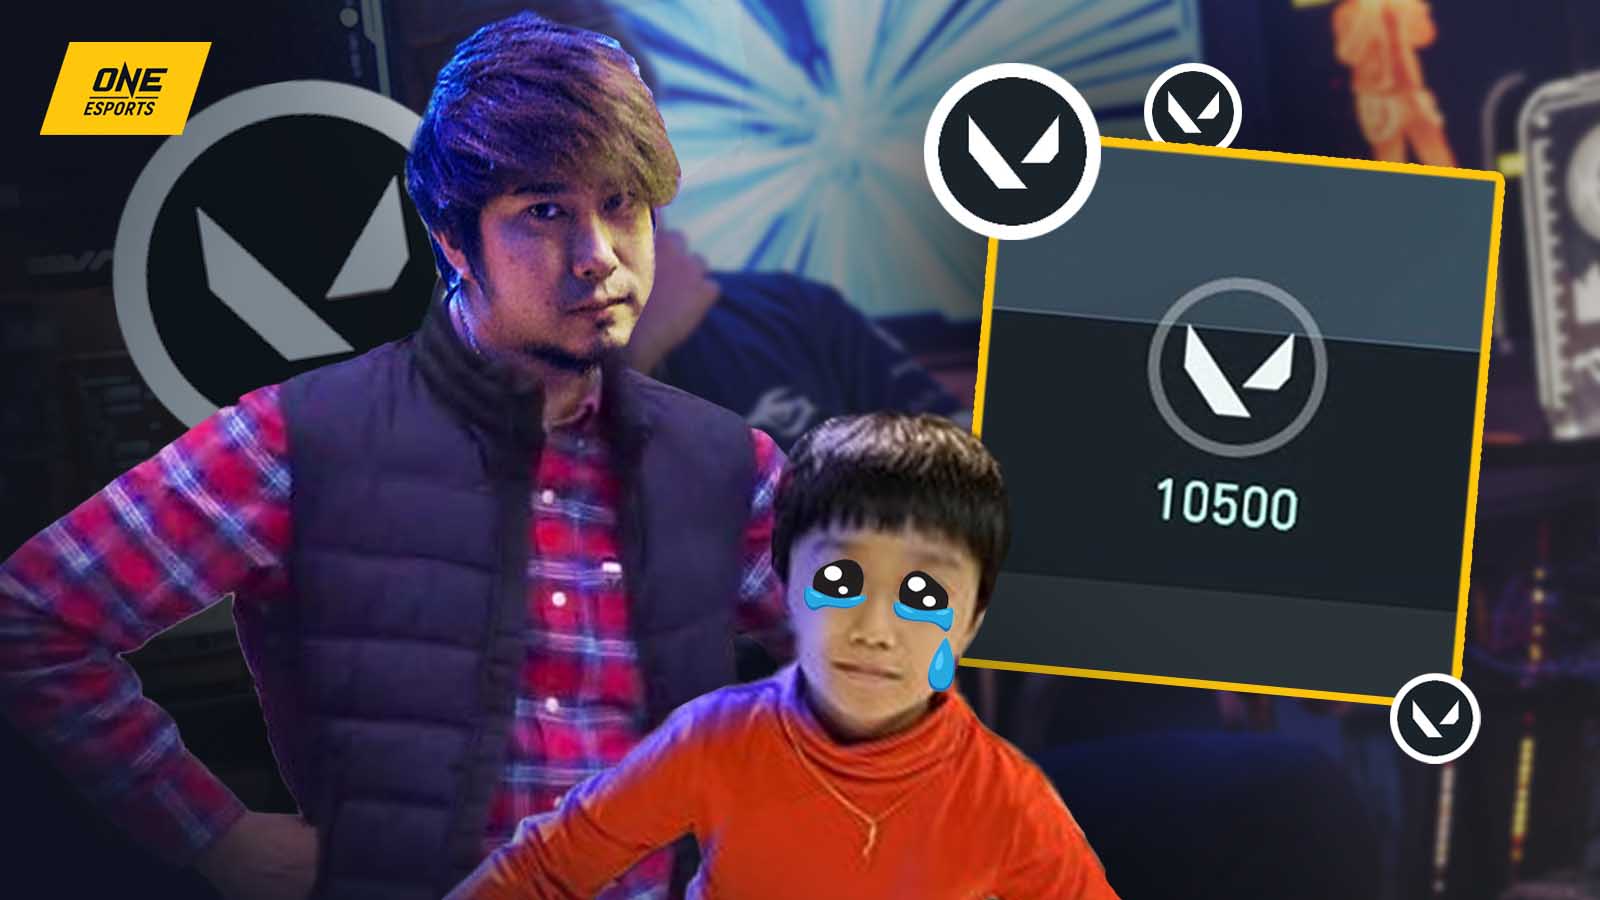 JessieVash’s 8-year-old son in tears after buying Valorant points - ONE Esports